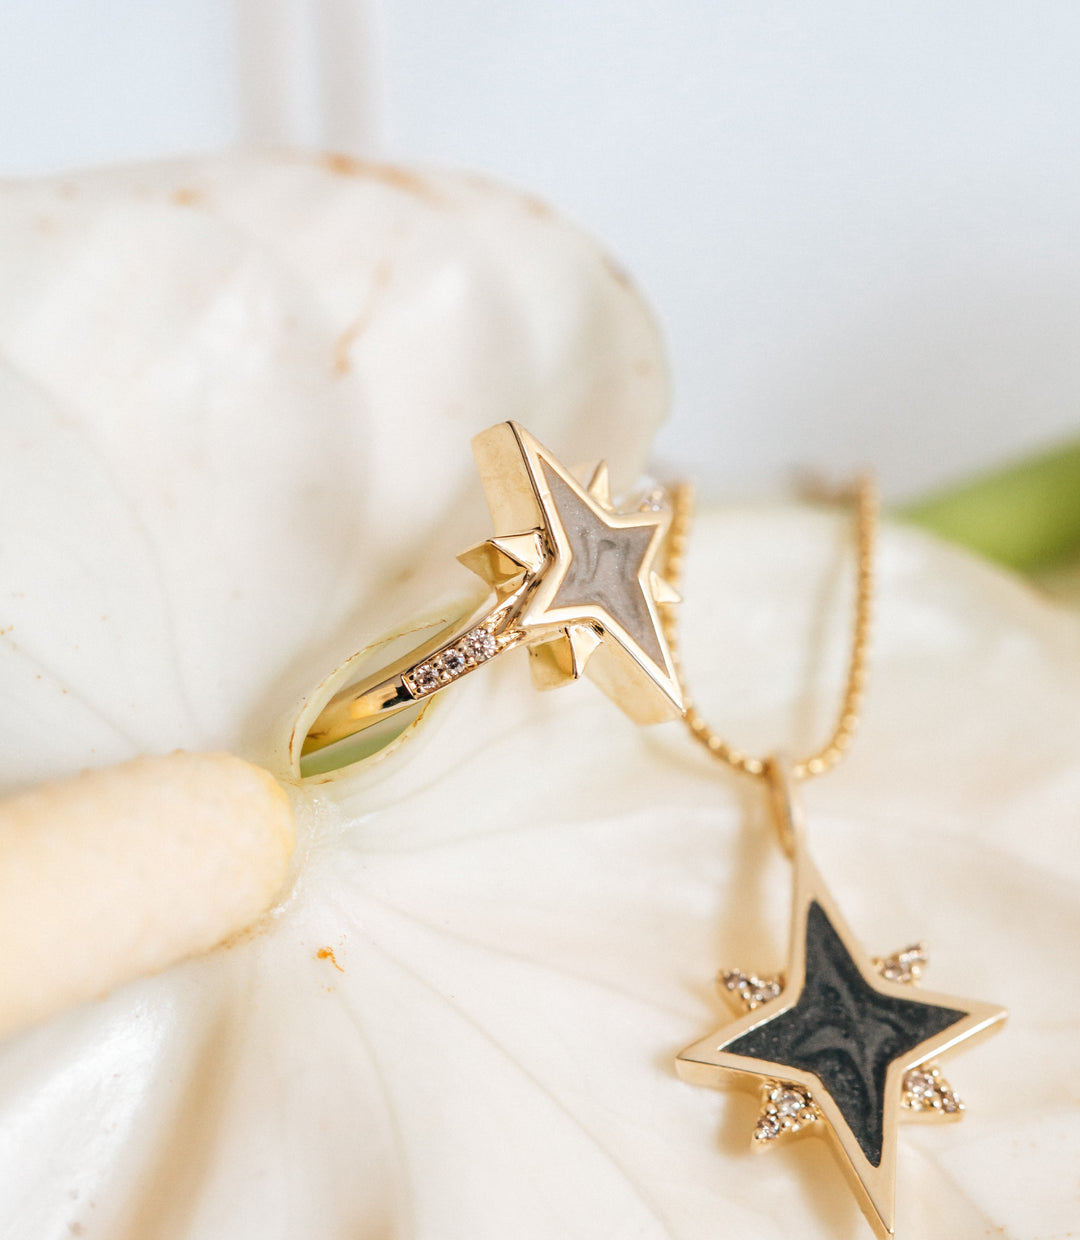 Pictured here are two of close by me jewelry's celestial cremation designs on the petal of a white Lily: the 14K Yellow Gold and Champagne Diamond North Star Ring and Pendant designs showing light and dark gray ashes settings